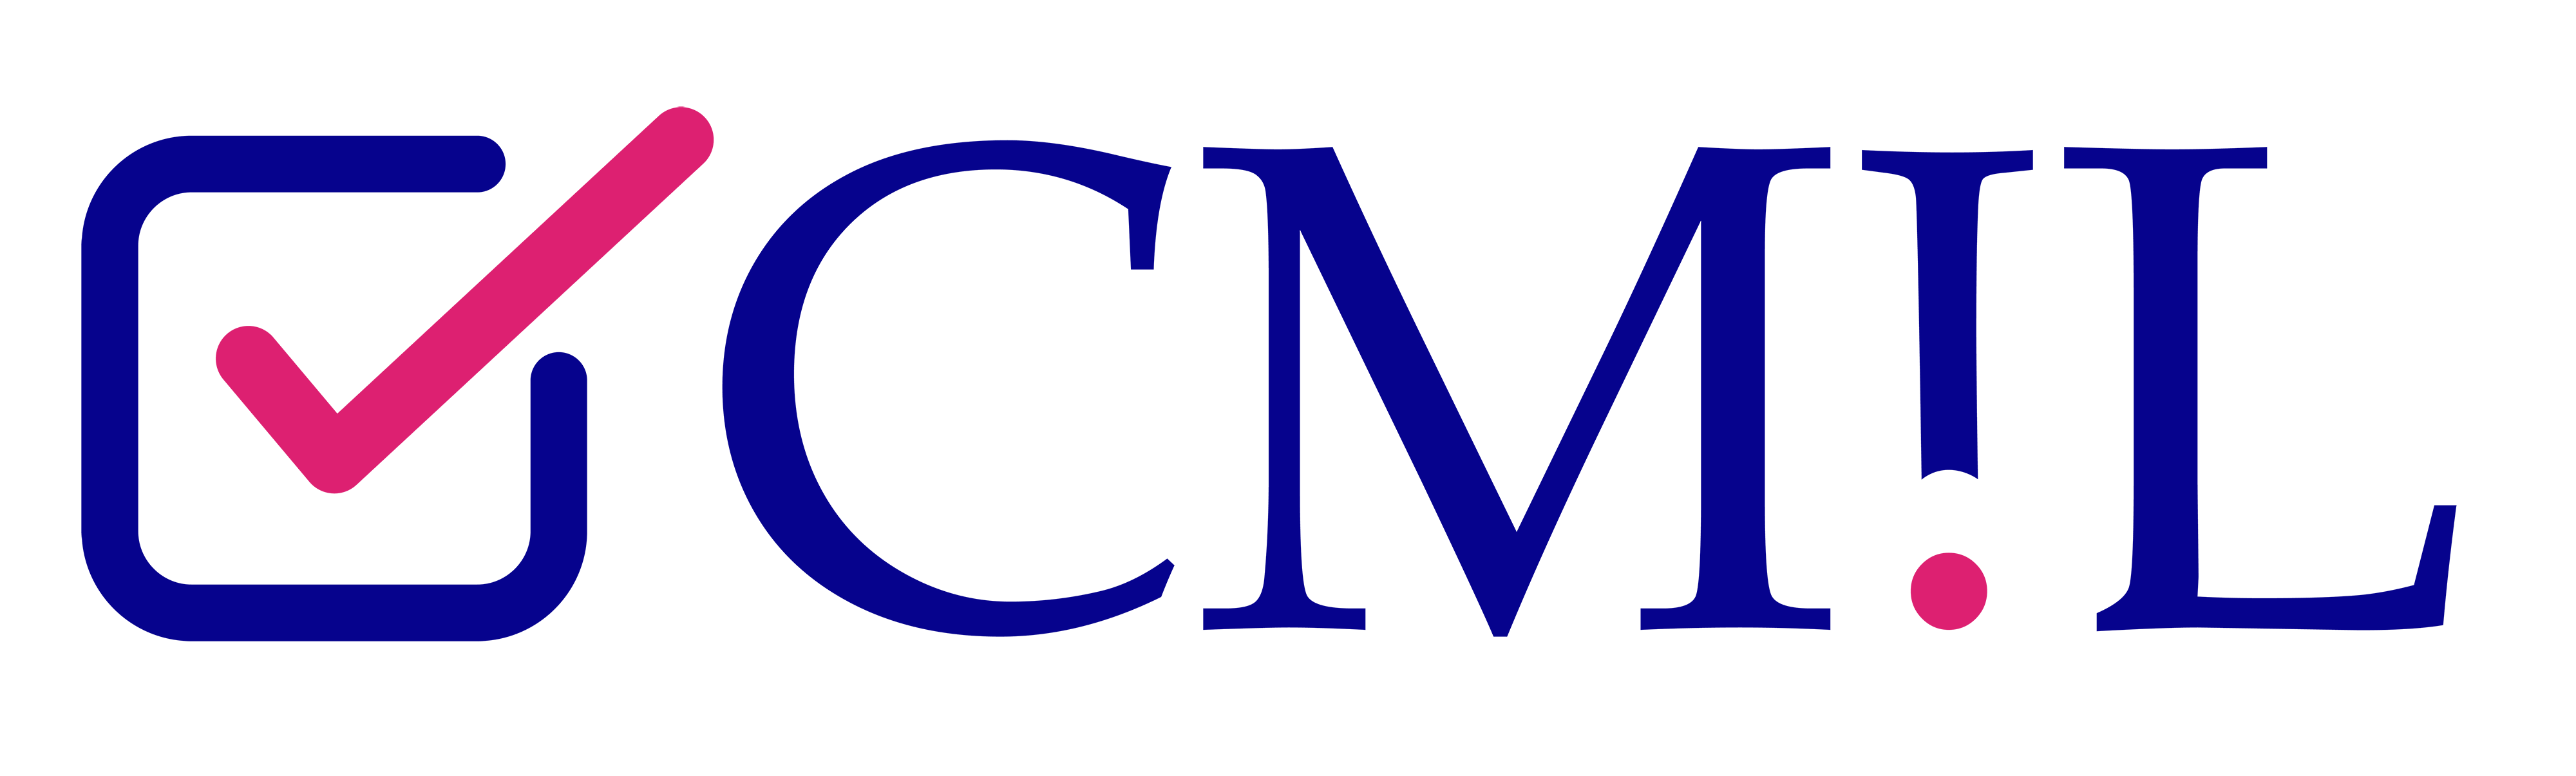 Center for Media and Information Literacy (CMiL)